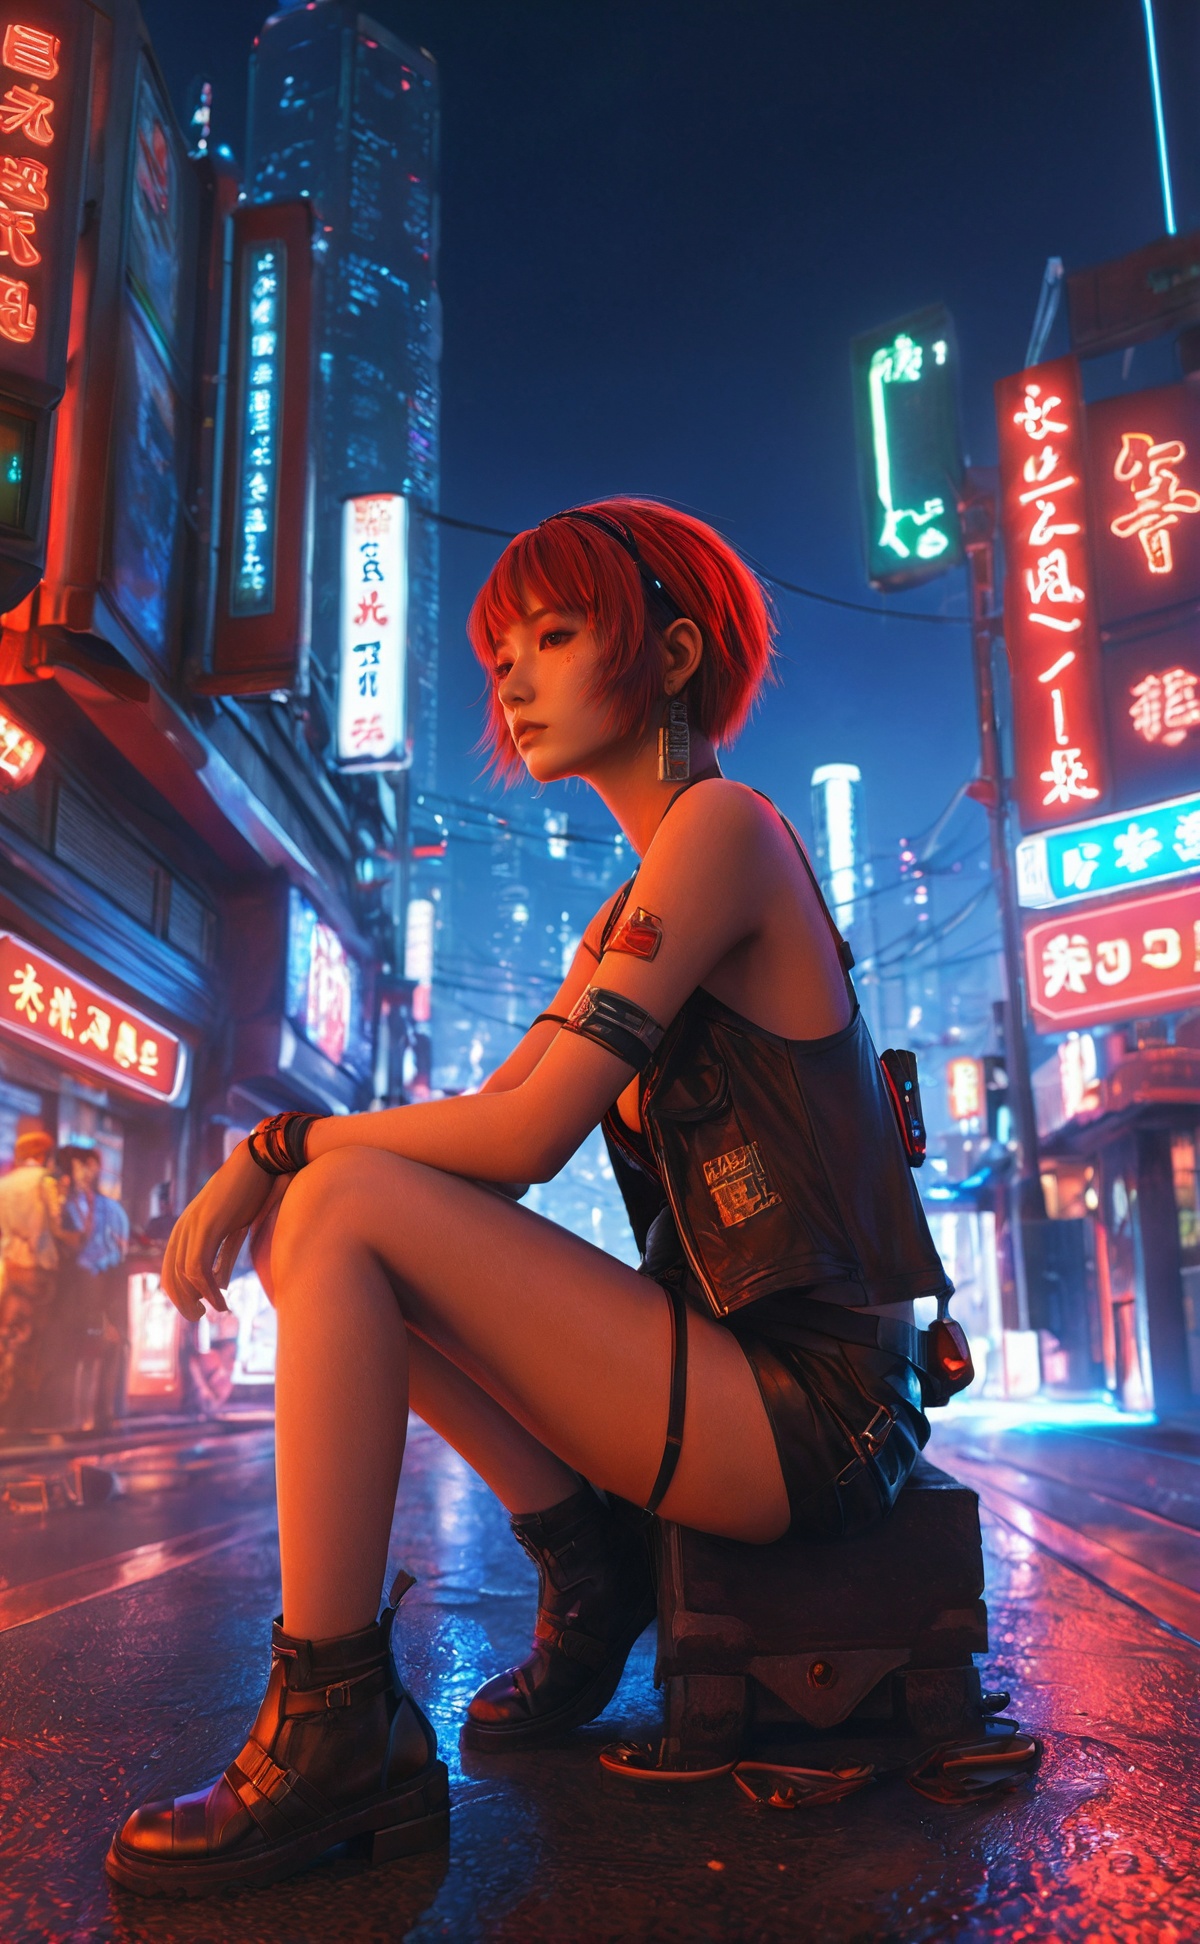 A woman with a red bob haircut sits on a suitcase in a neon-lit city at night.